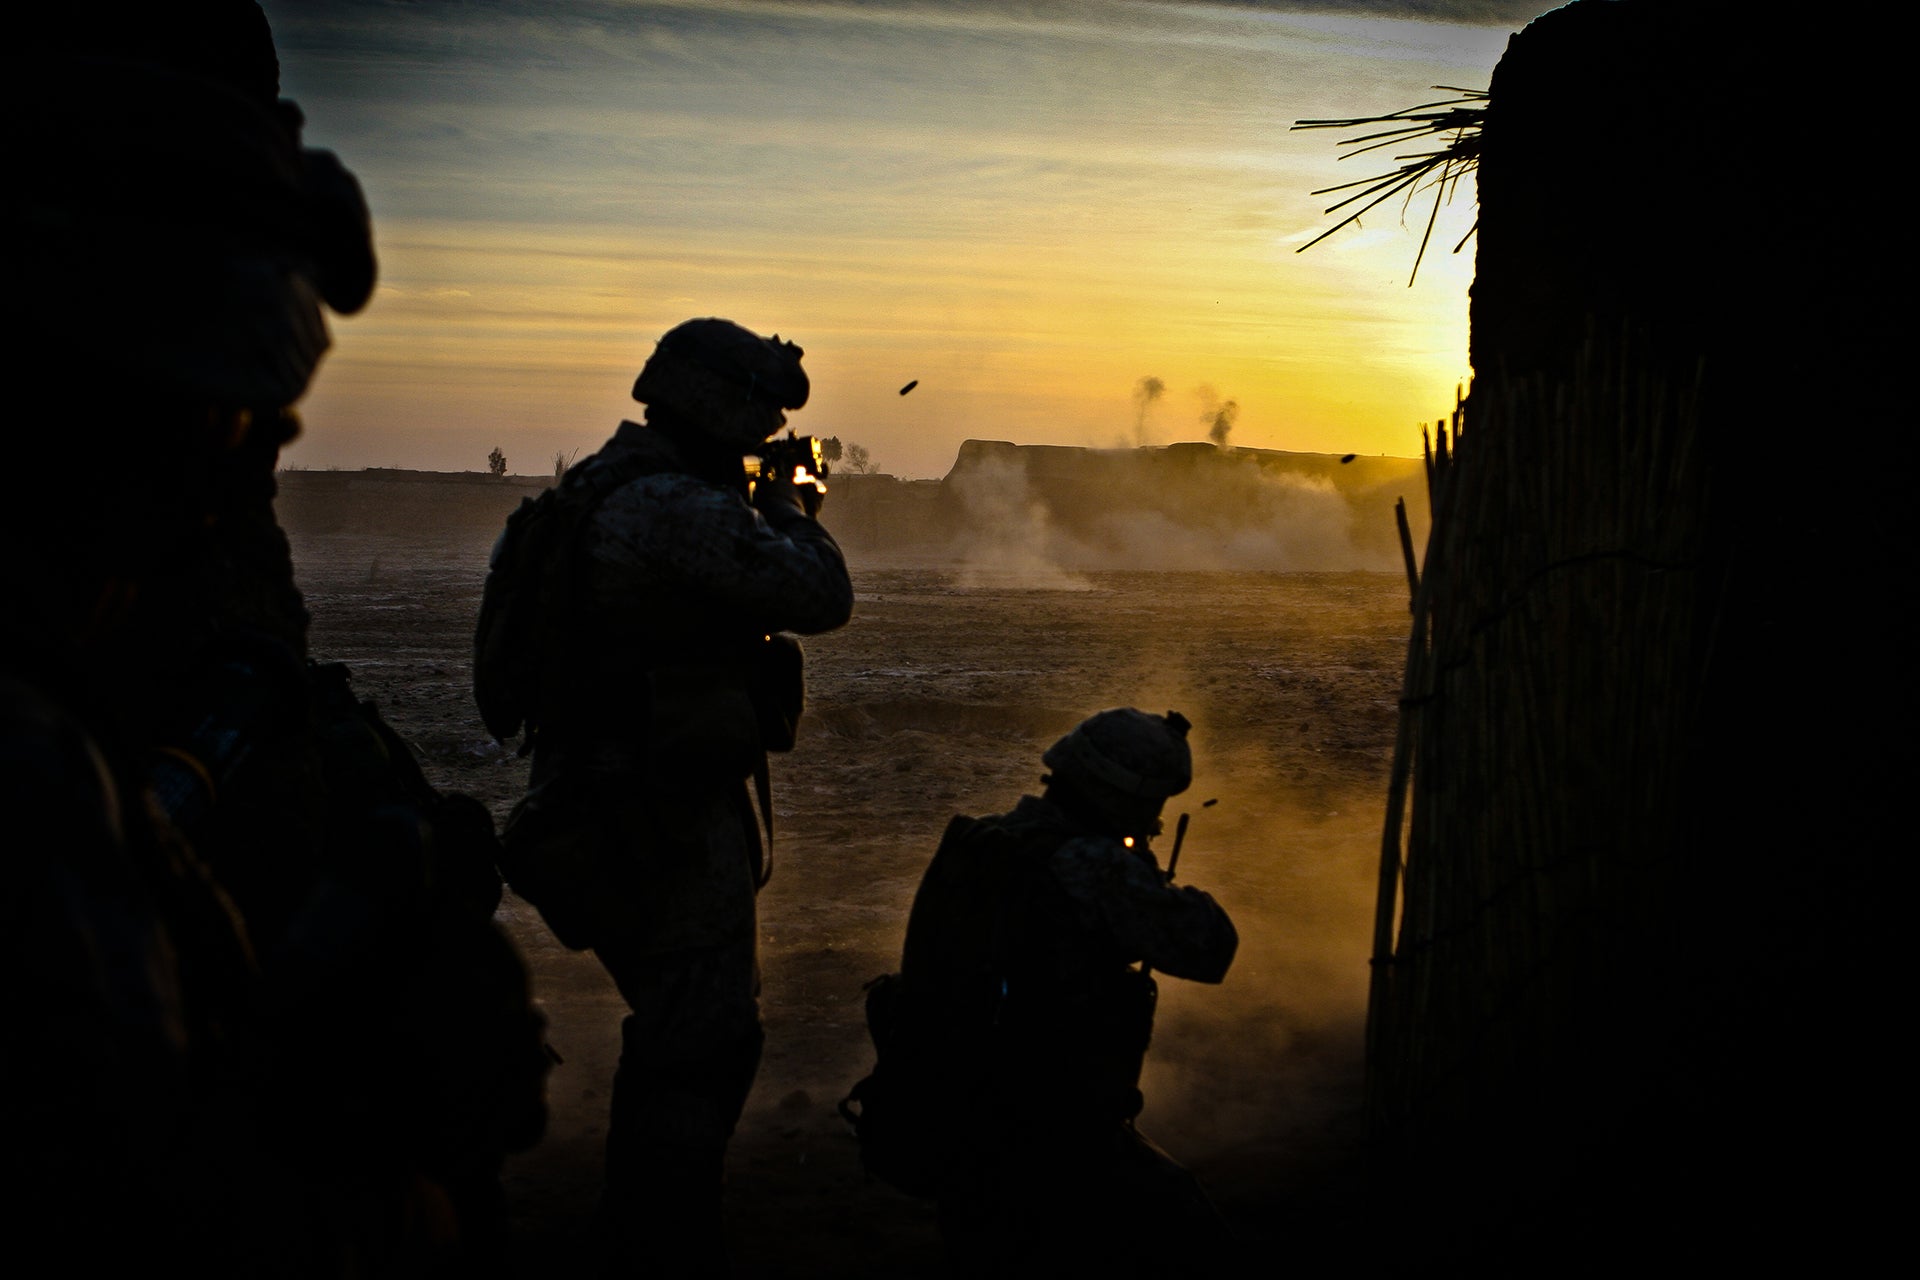 Marines with Alpha Company, 1st Battalion, 6th Marine Regiment return fire during a gunfight in Helmand province, Afghanistan in January 2010 while then-Sgt. Bill Bee was leading the patrol. (Cpl. James Clark/U.S. Marine Corps)